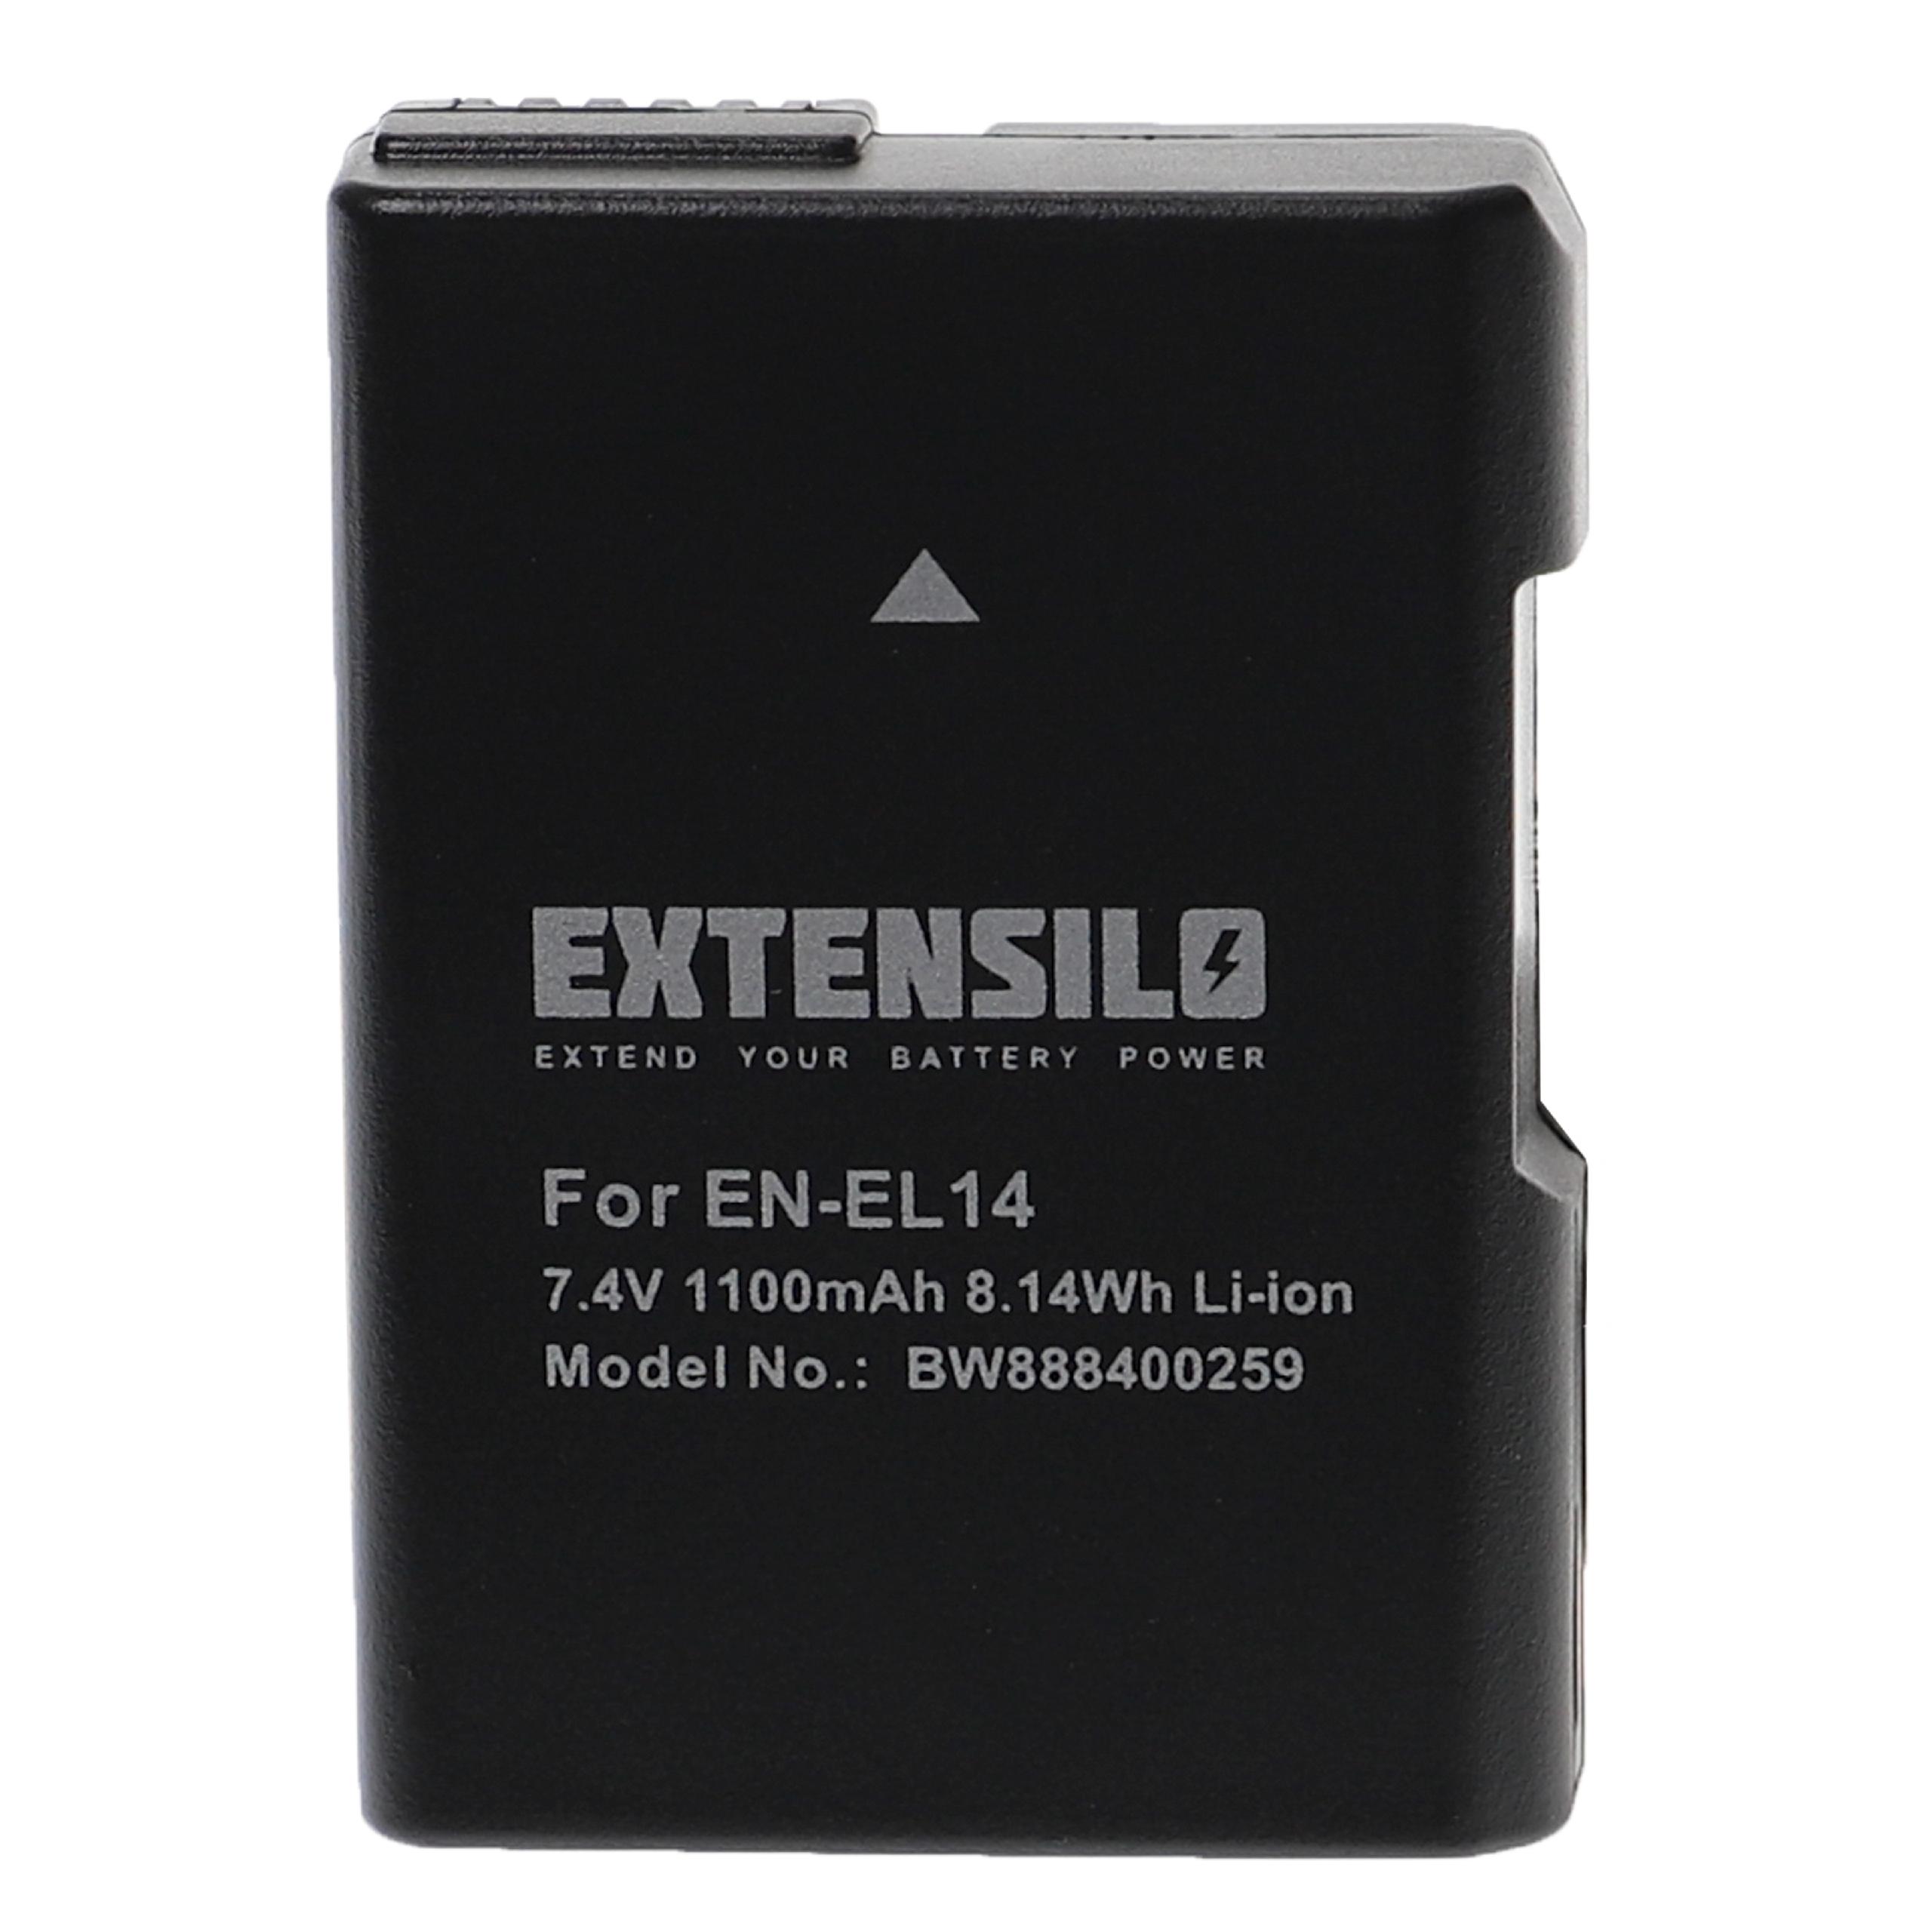 Battery Replacement for Nikon EN-EL14 - 1100mAh, 7.4V, Li-Ion with Info Chip